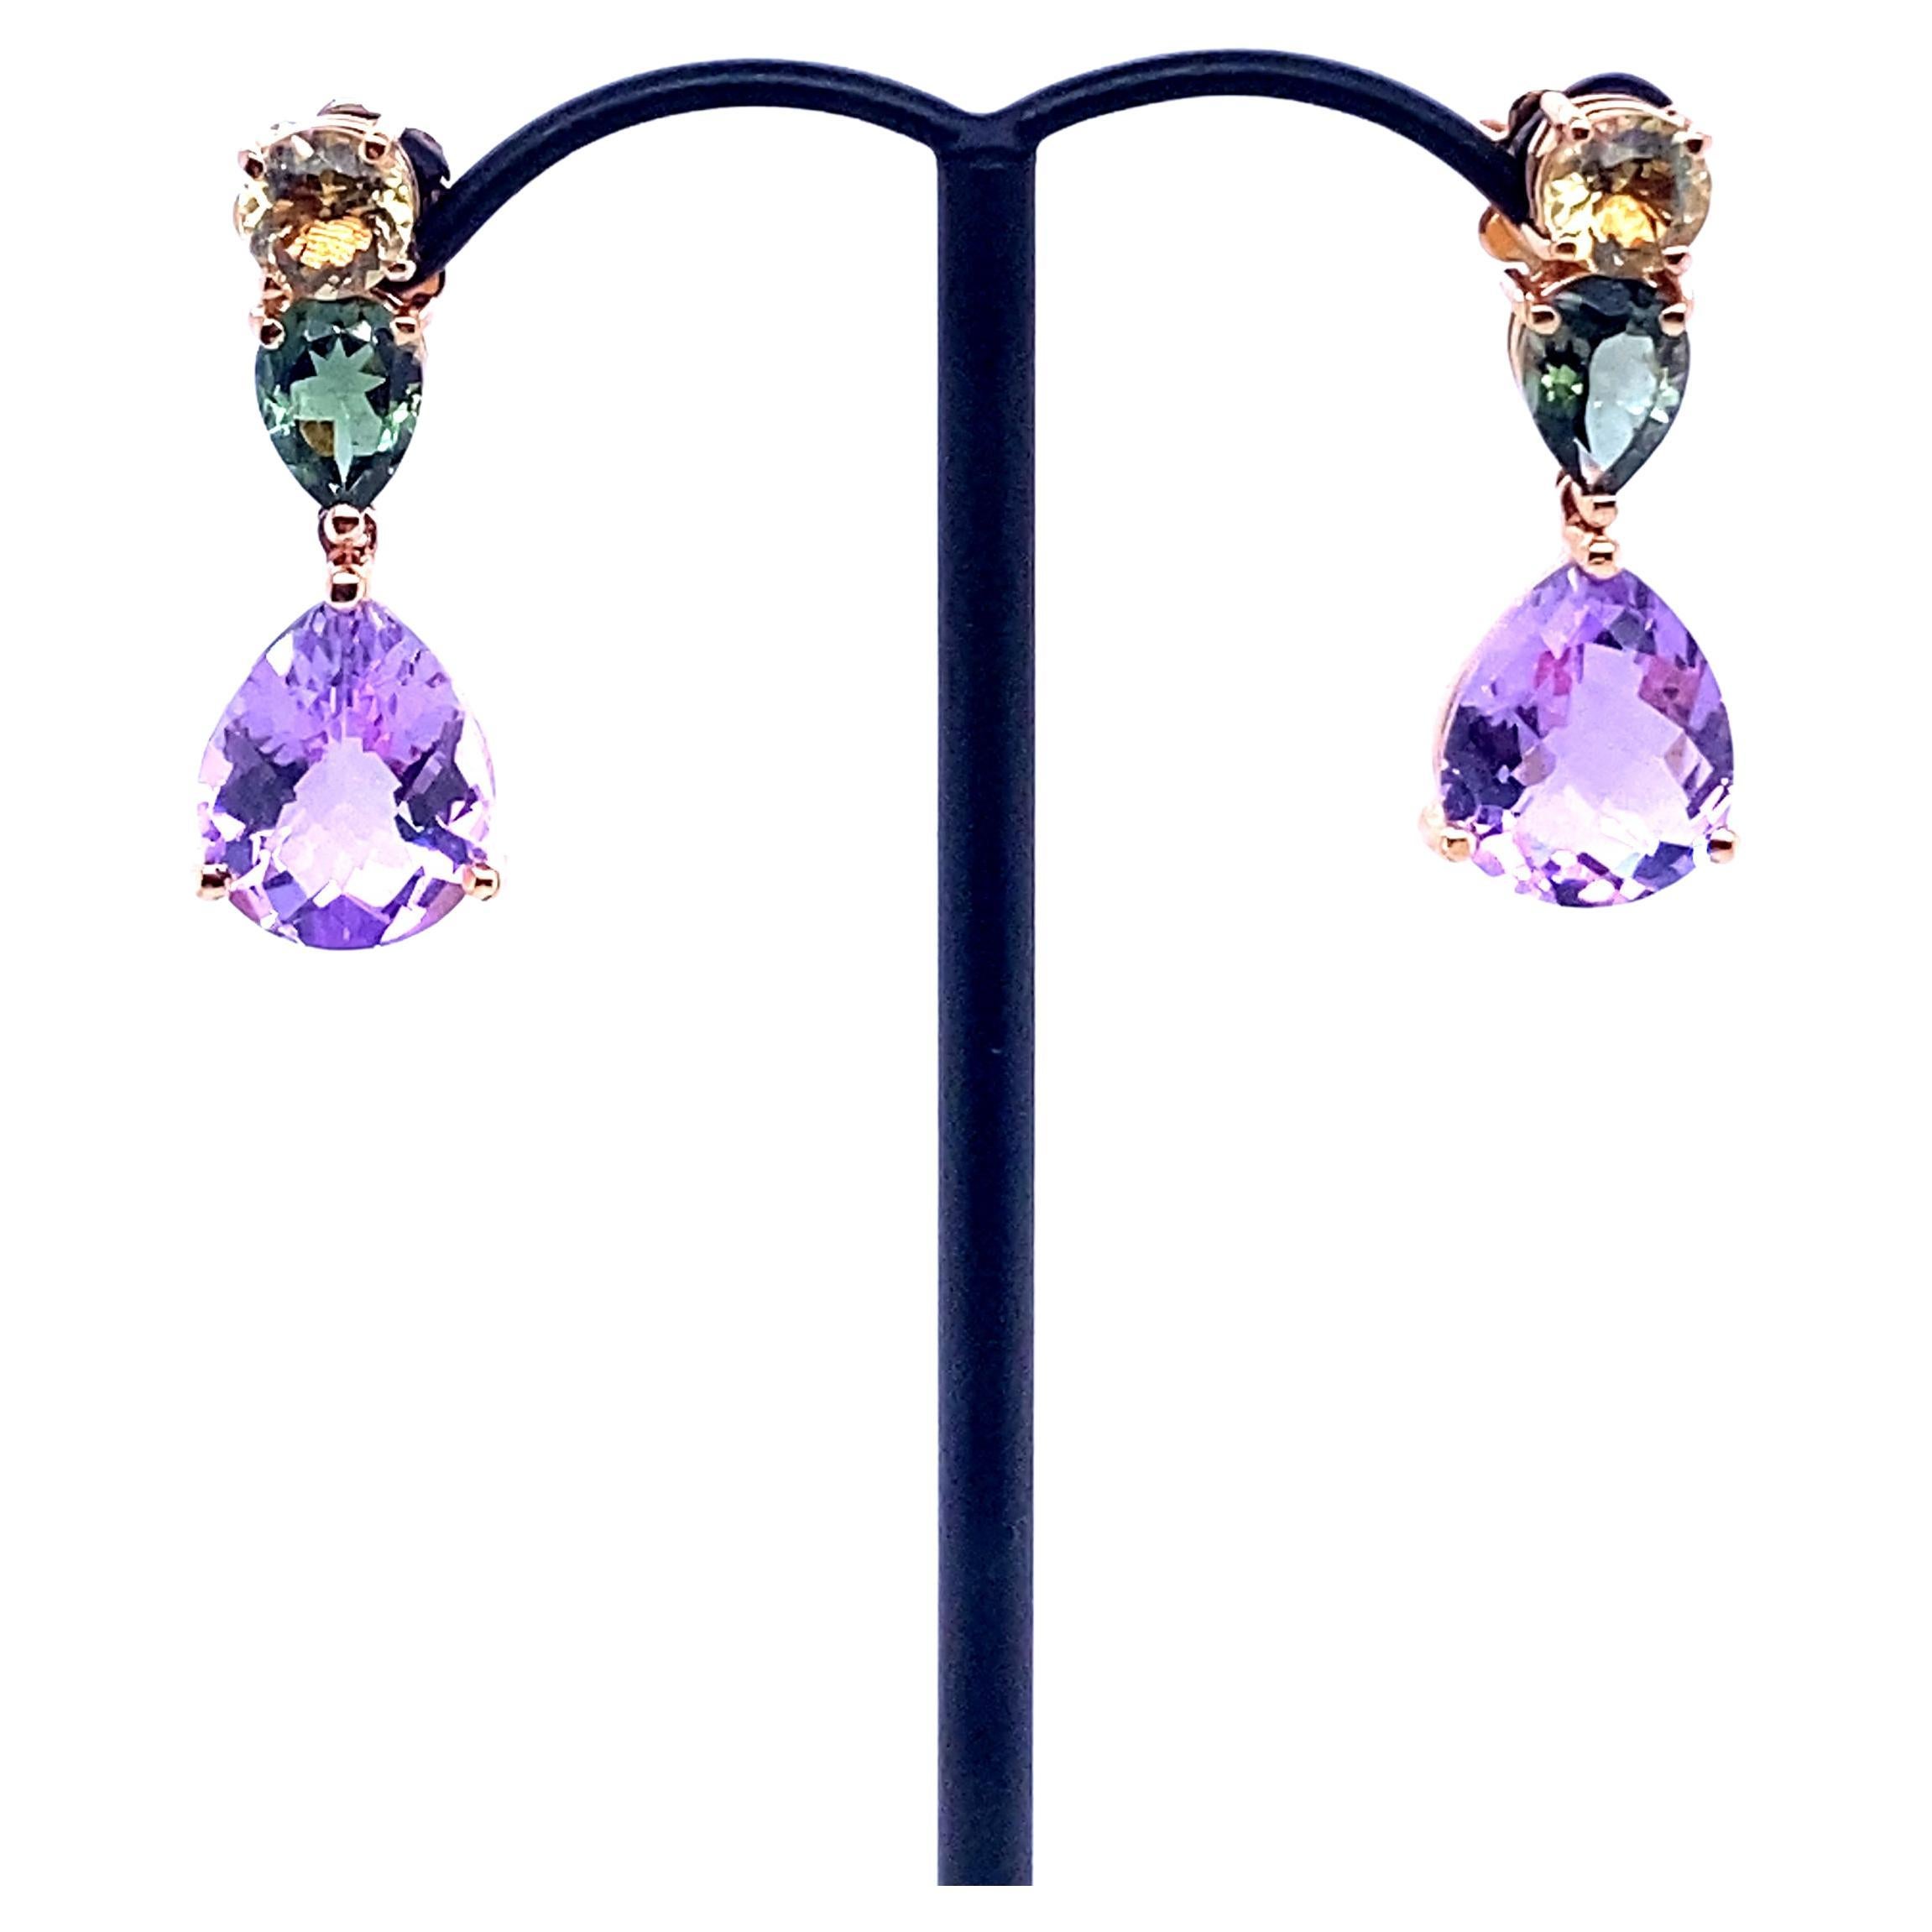 French Rose Gold Earrings Accompanied by a Amethyst, Citrine and Tourmaline
French Collection by Mesure et Art du Temps.

The Amethyst is 1cm in length and 0.9 cm in width.
The Tourmaline is 0.7 cm in length and 0.5 cm in width.
The Citrine is 0.5